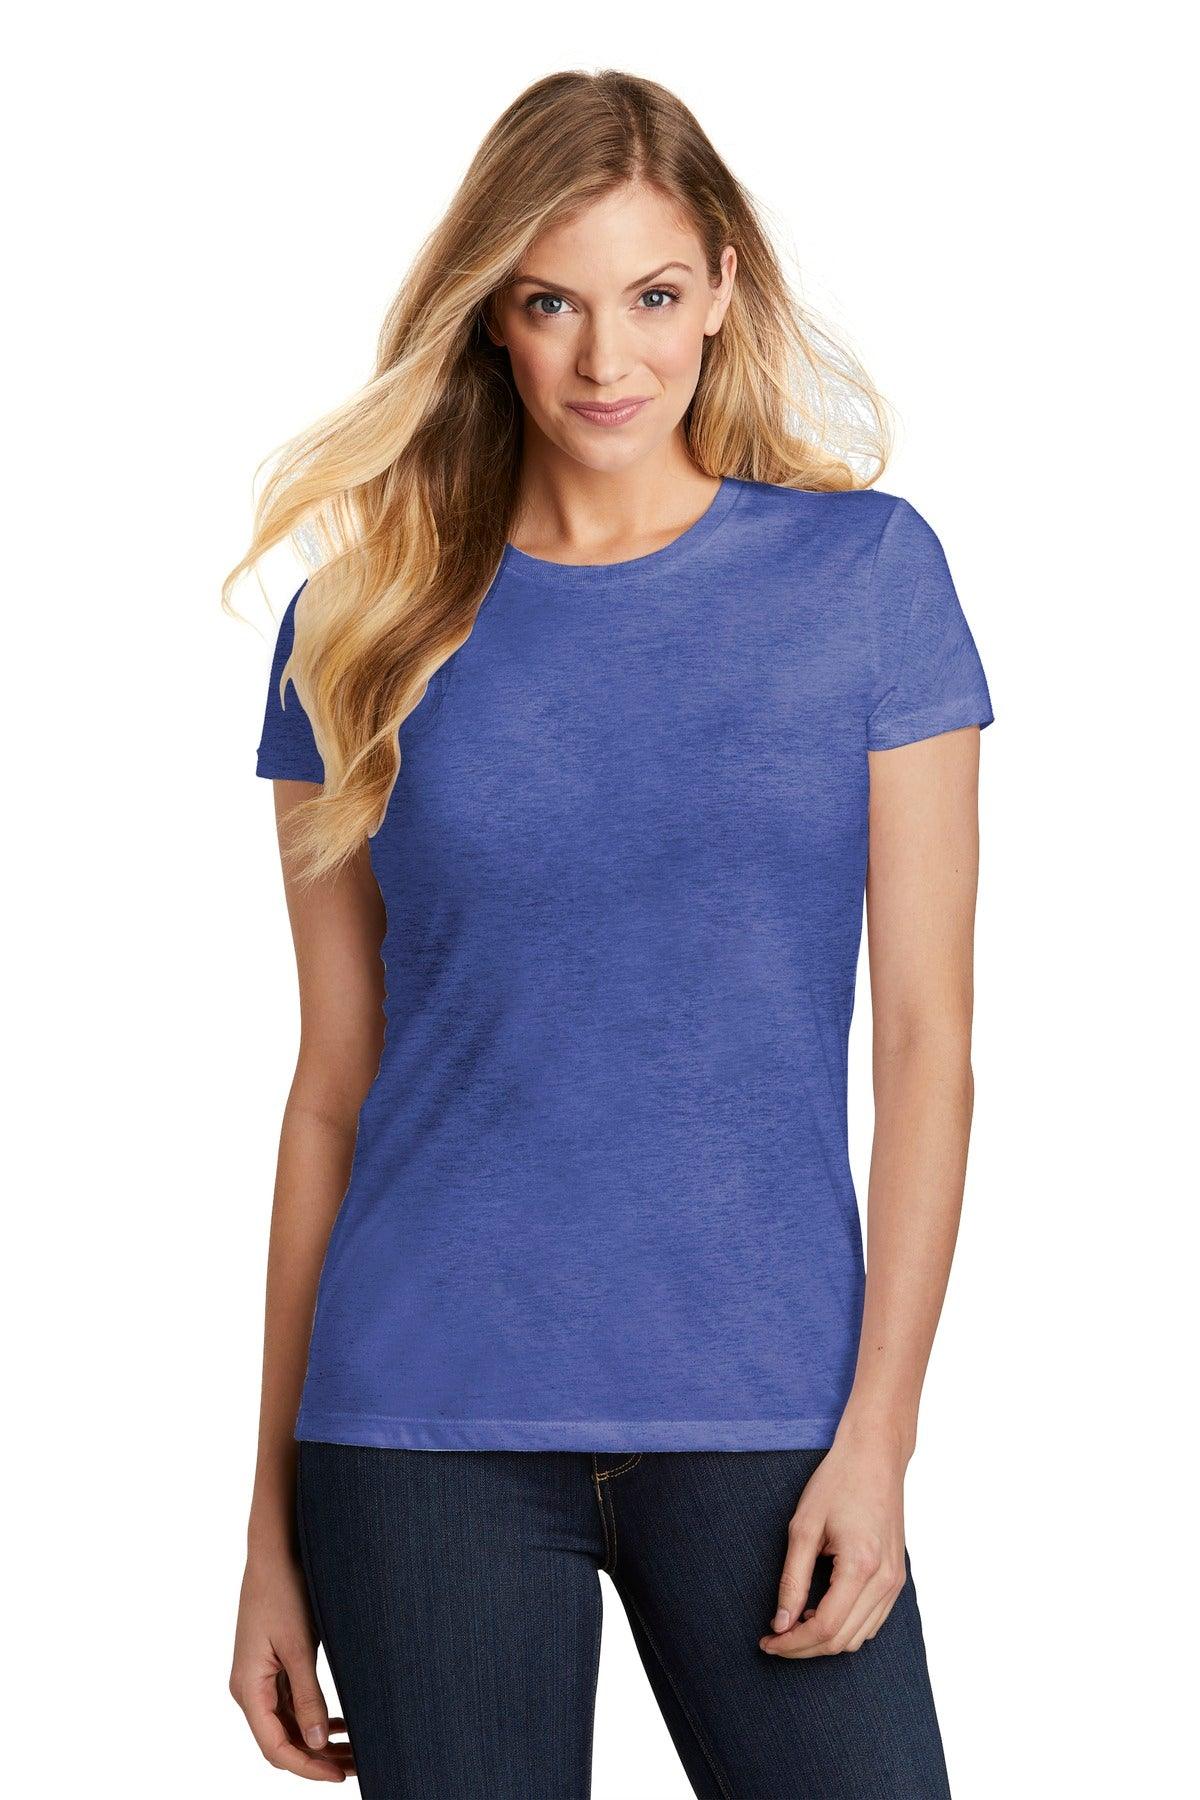 District Women's Fitted Perfect Tri Tee. DT155 - Dresses Max